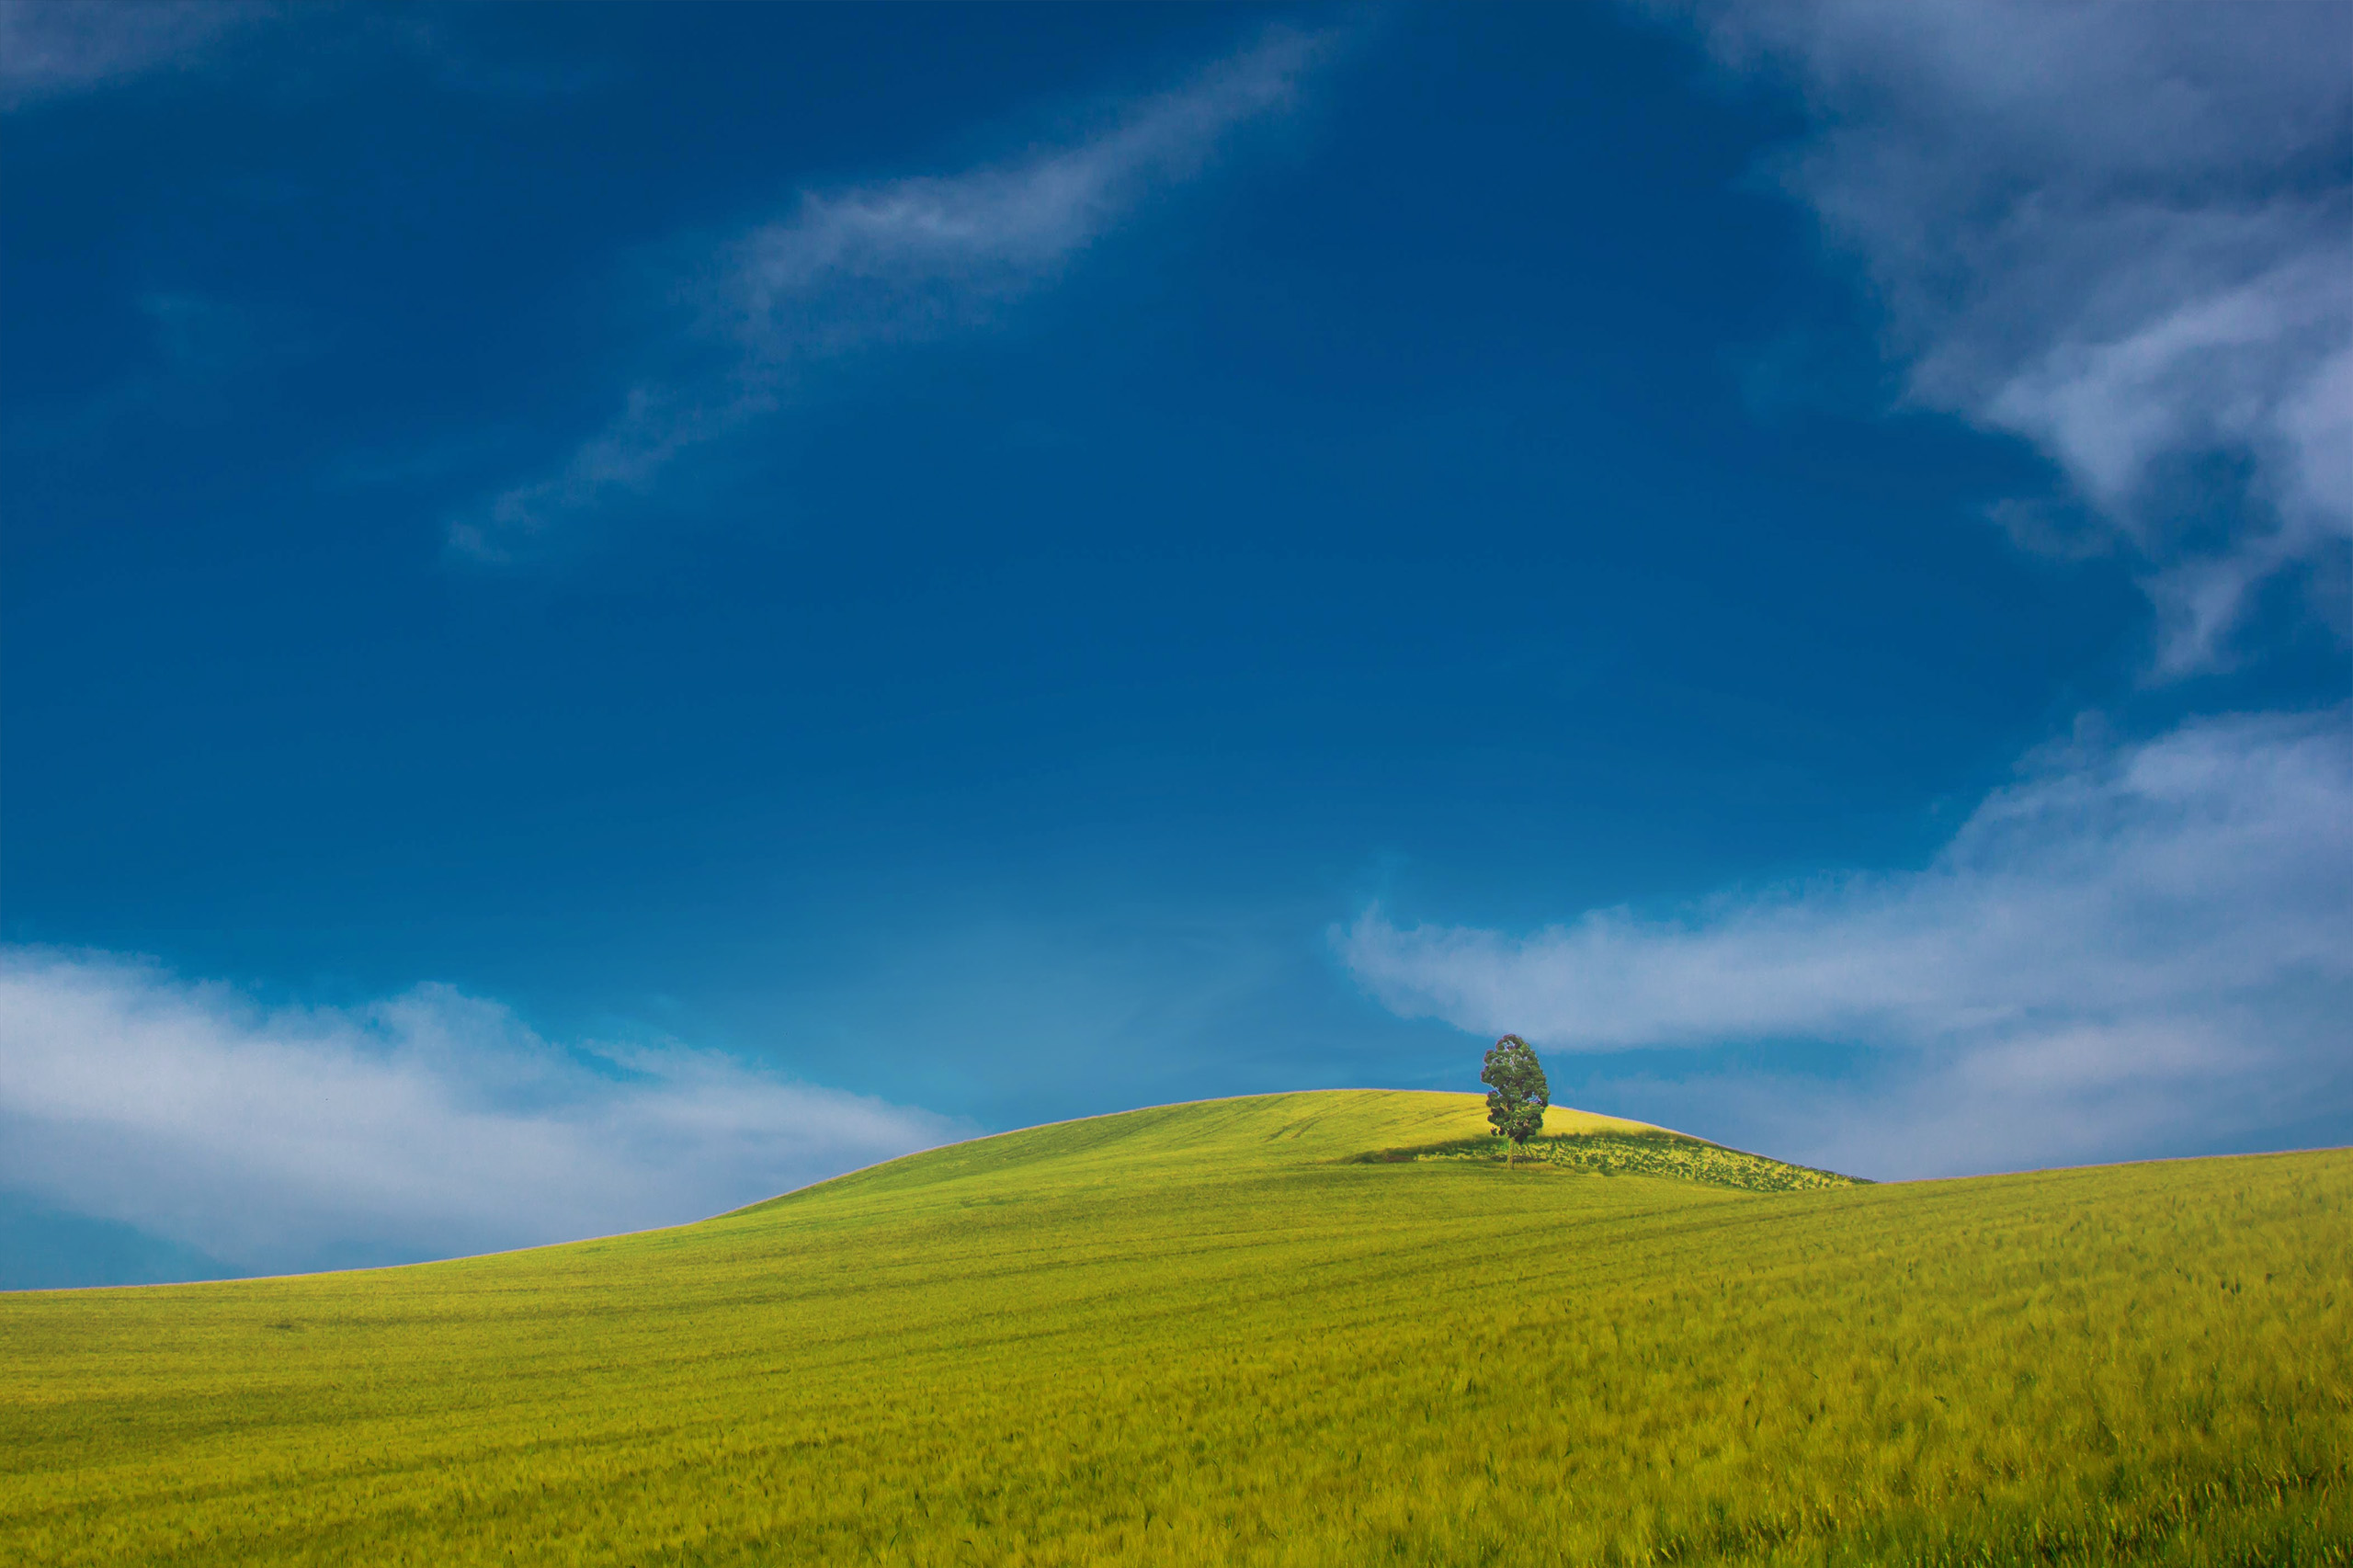 A green field with a tree under a blue sky